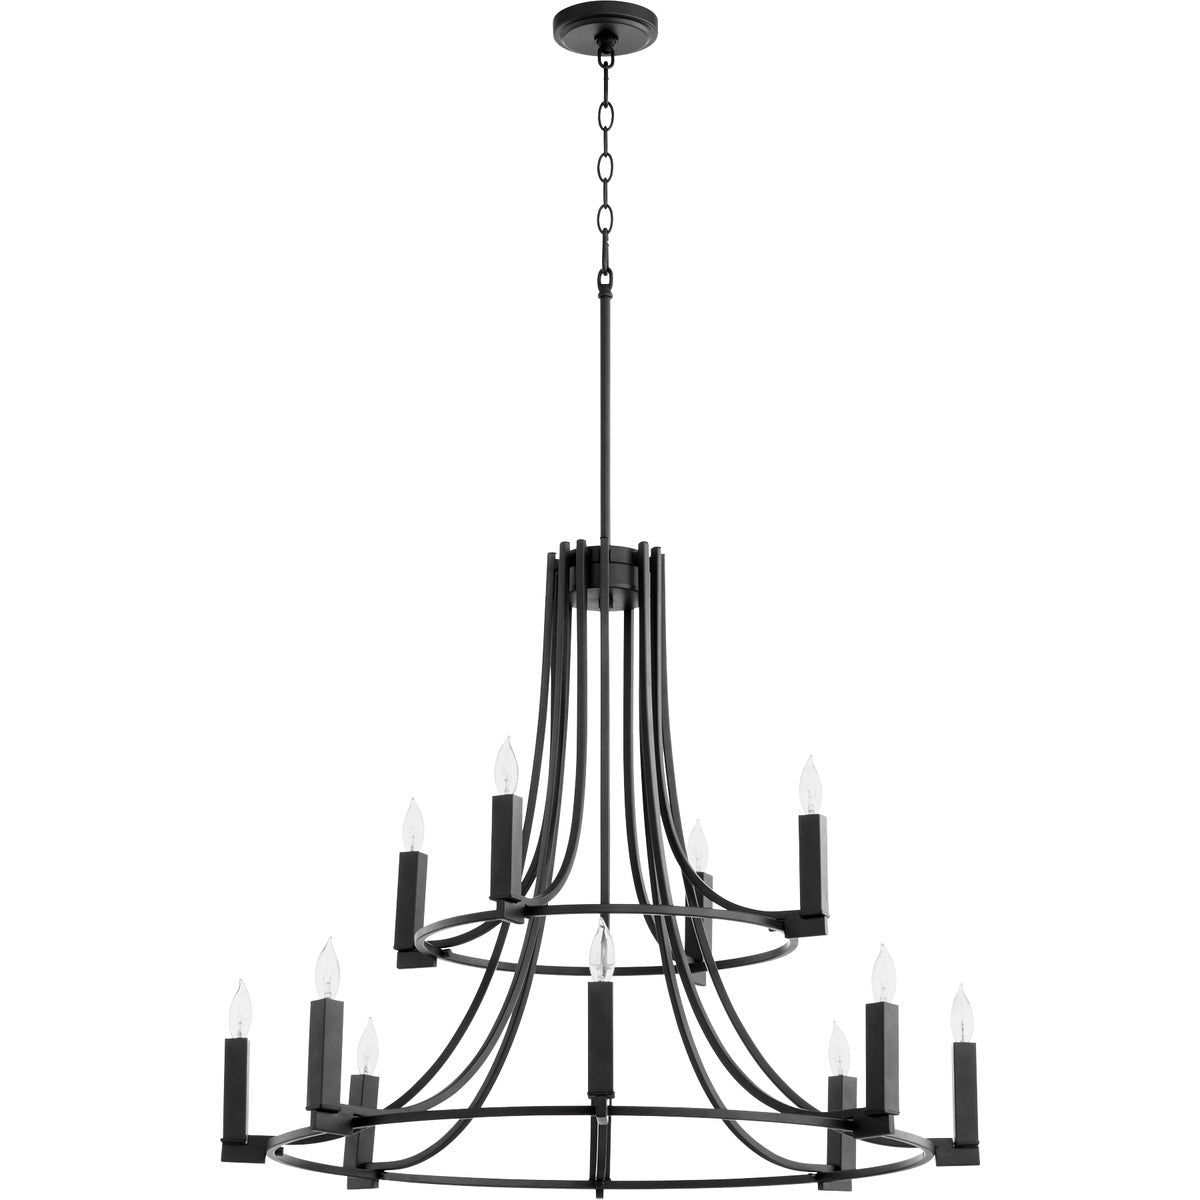 Black Chandelier with geometric design and interchangeable candle sleeves. Suspended from adjustable chain and stem mounting system. Perfect for any interior space.